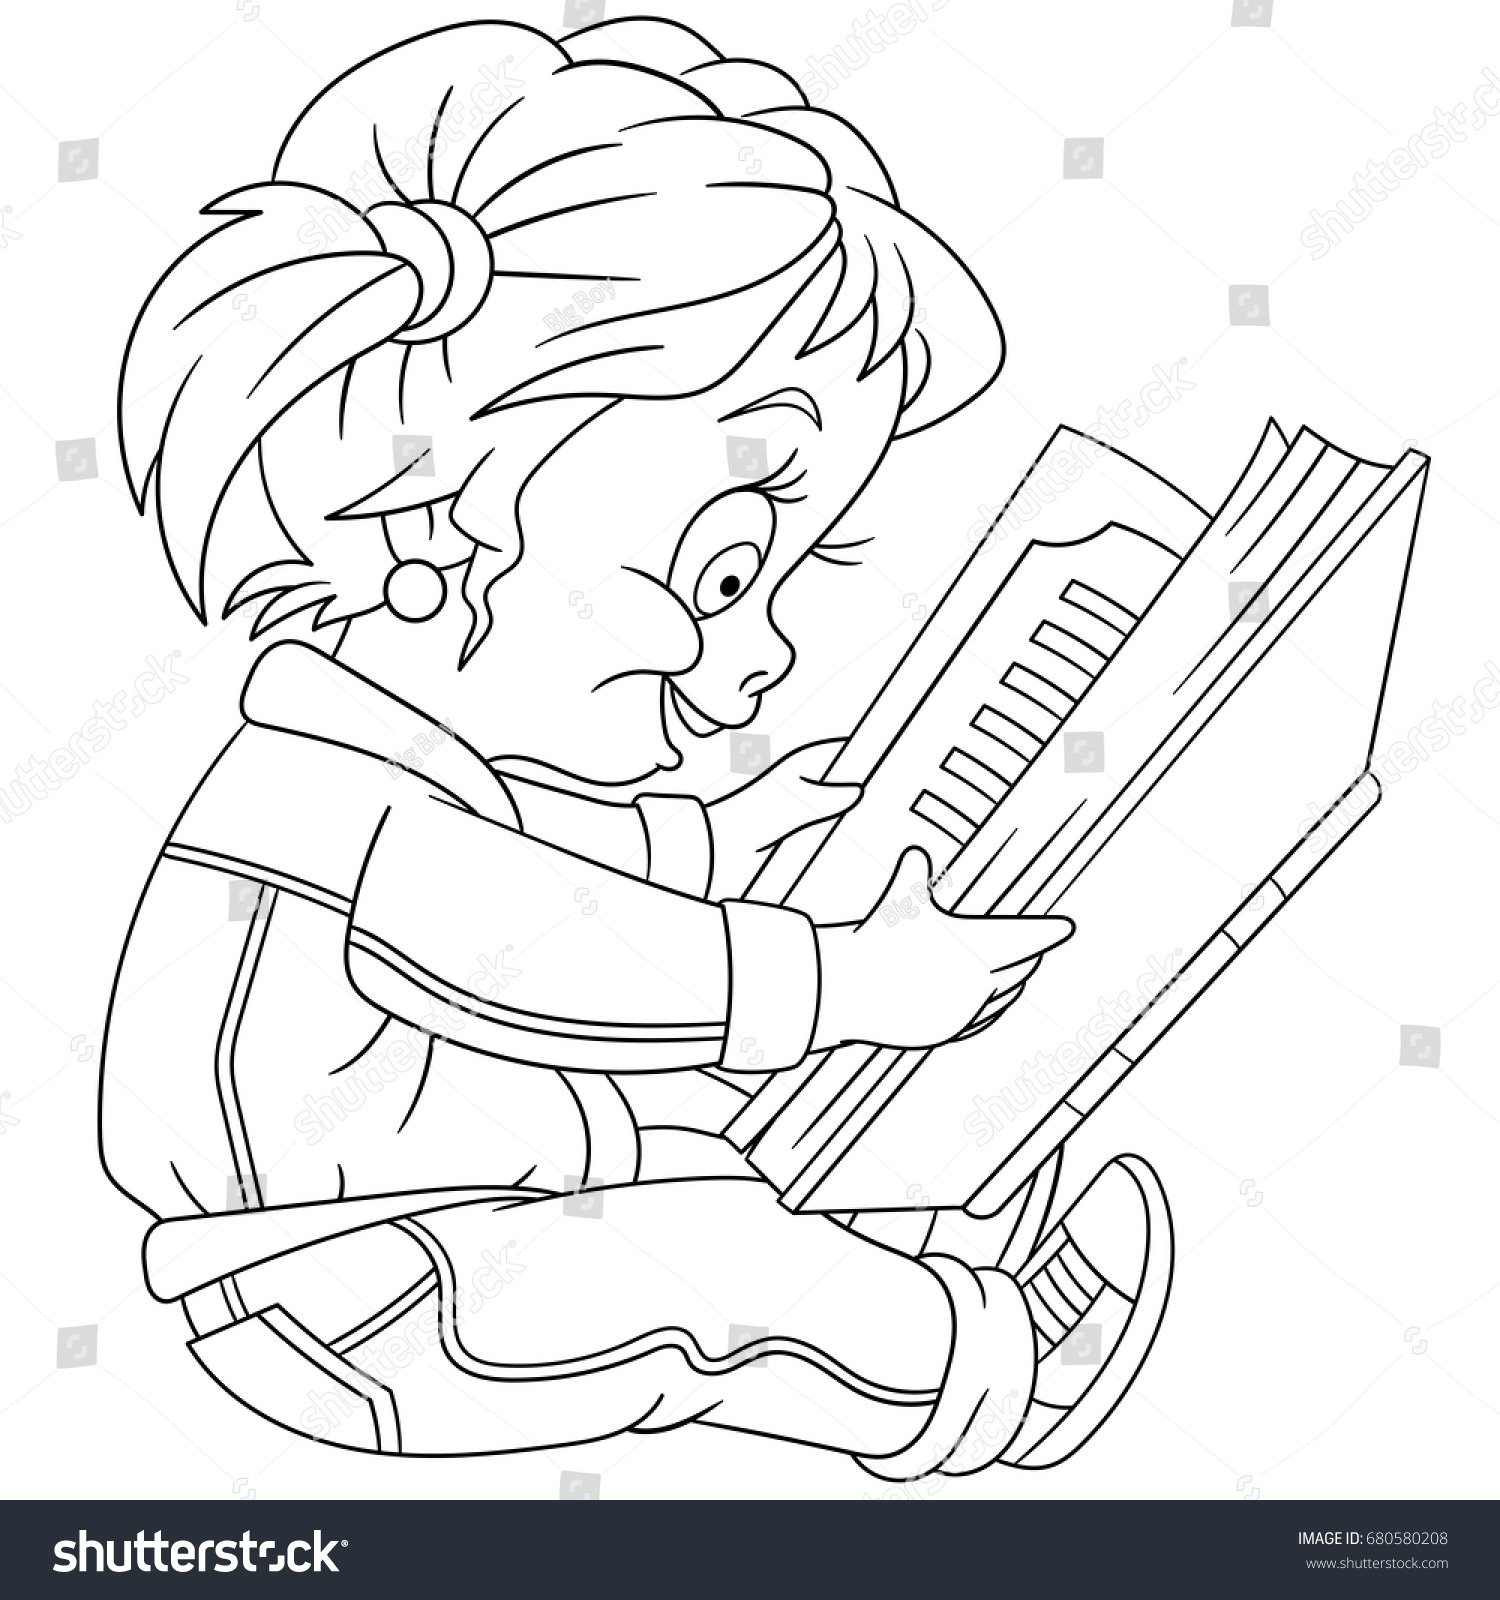 Coloring page of preschool girl reading a book Colouring book for kids and children